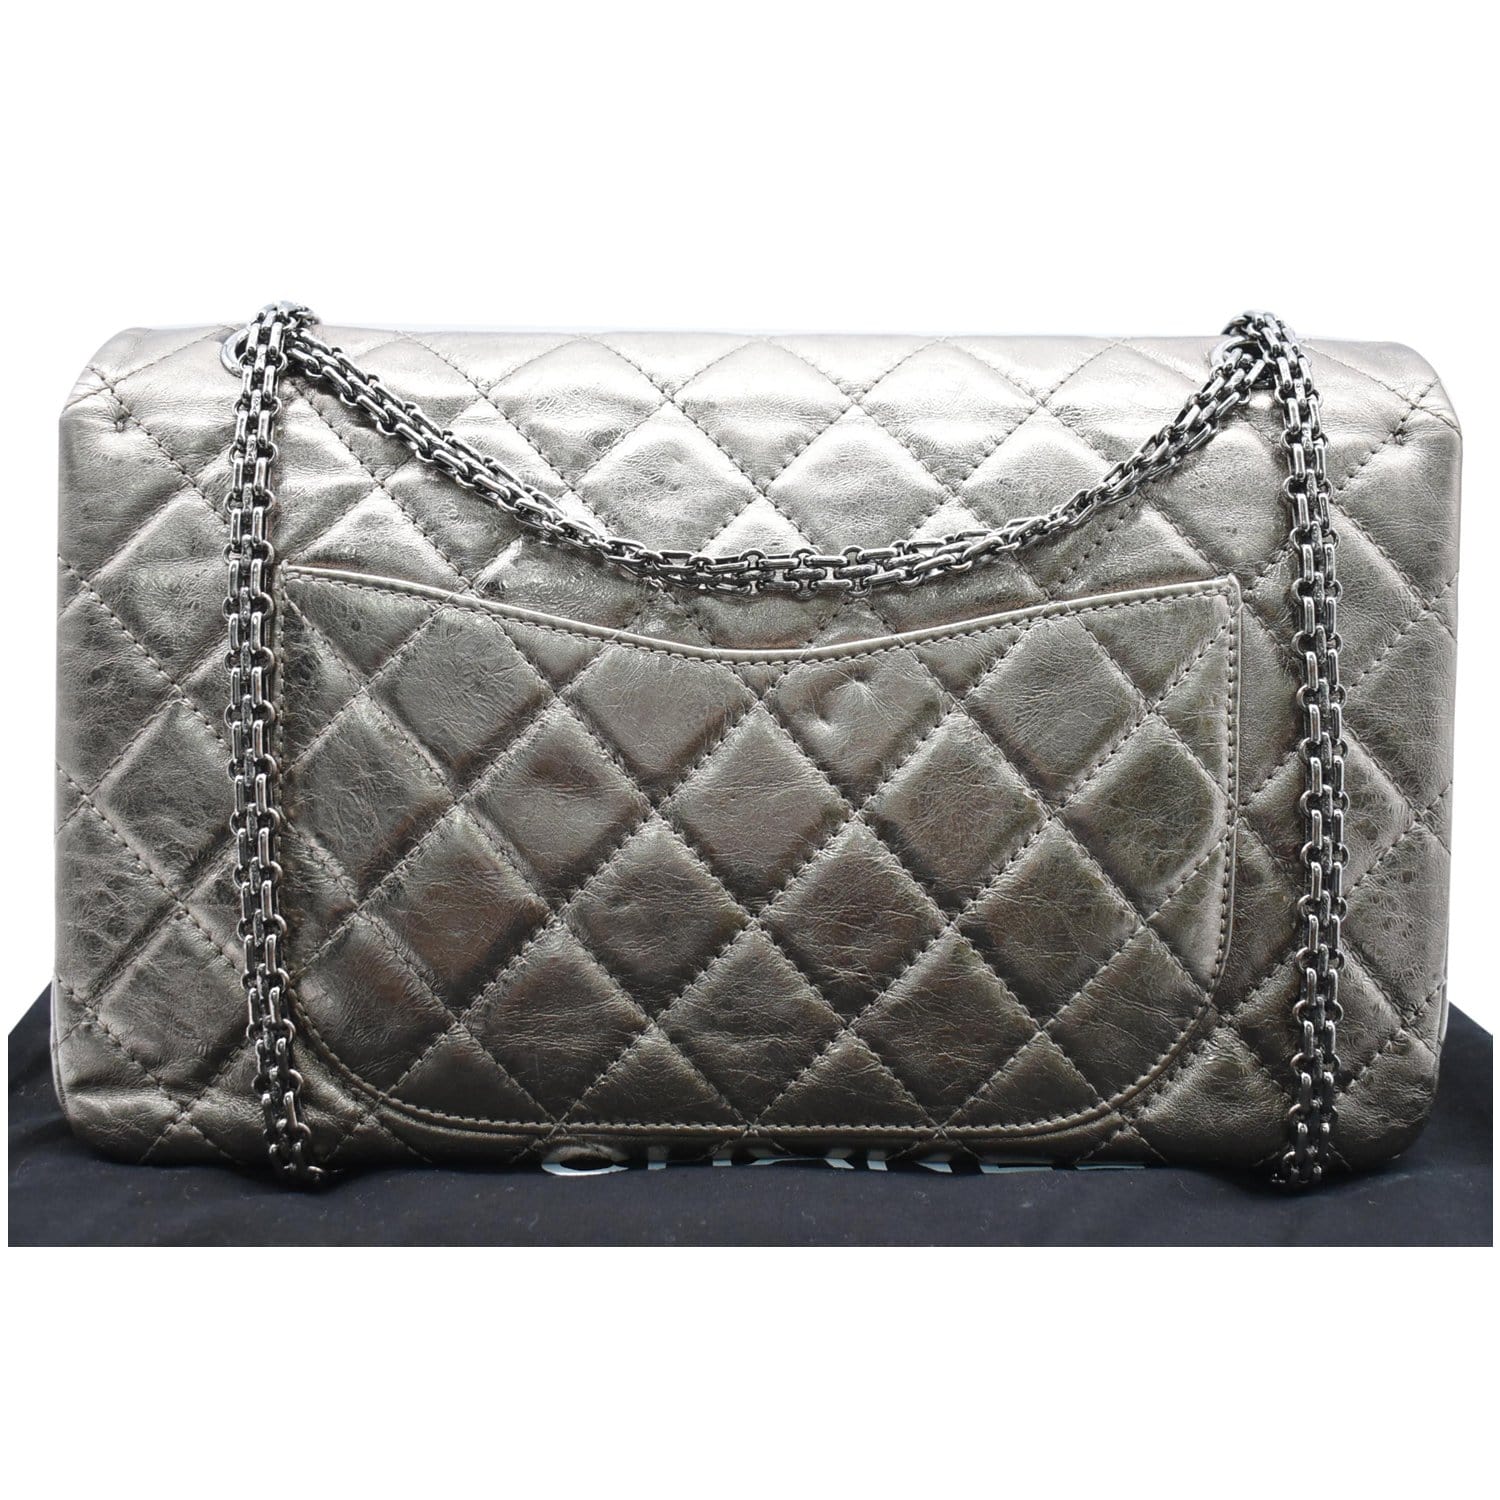 Reissue 2.55 Flap Bag Quilted Aged Calfskin 226